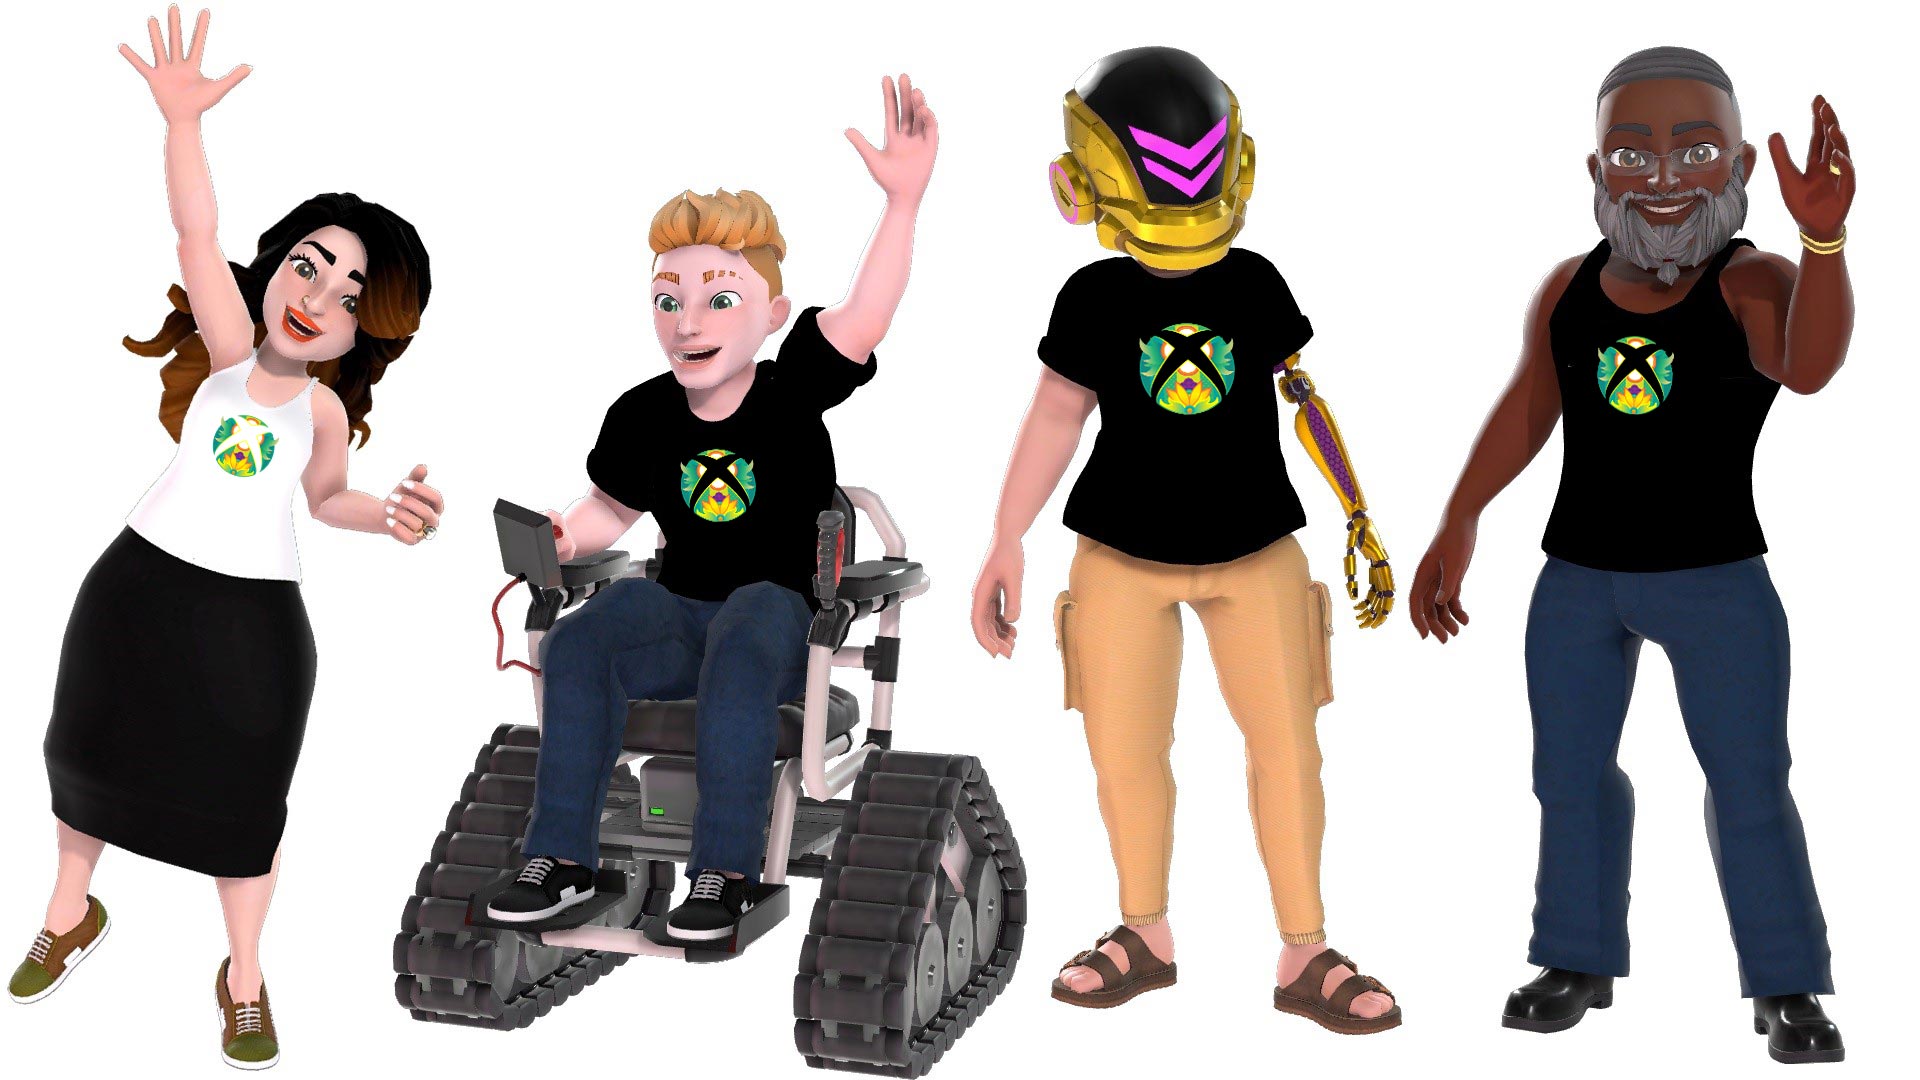 Four avatar characters displaying the Indigenous stylized Xbox sphere on their tops.